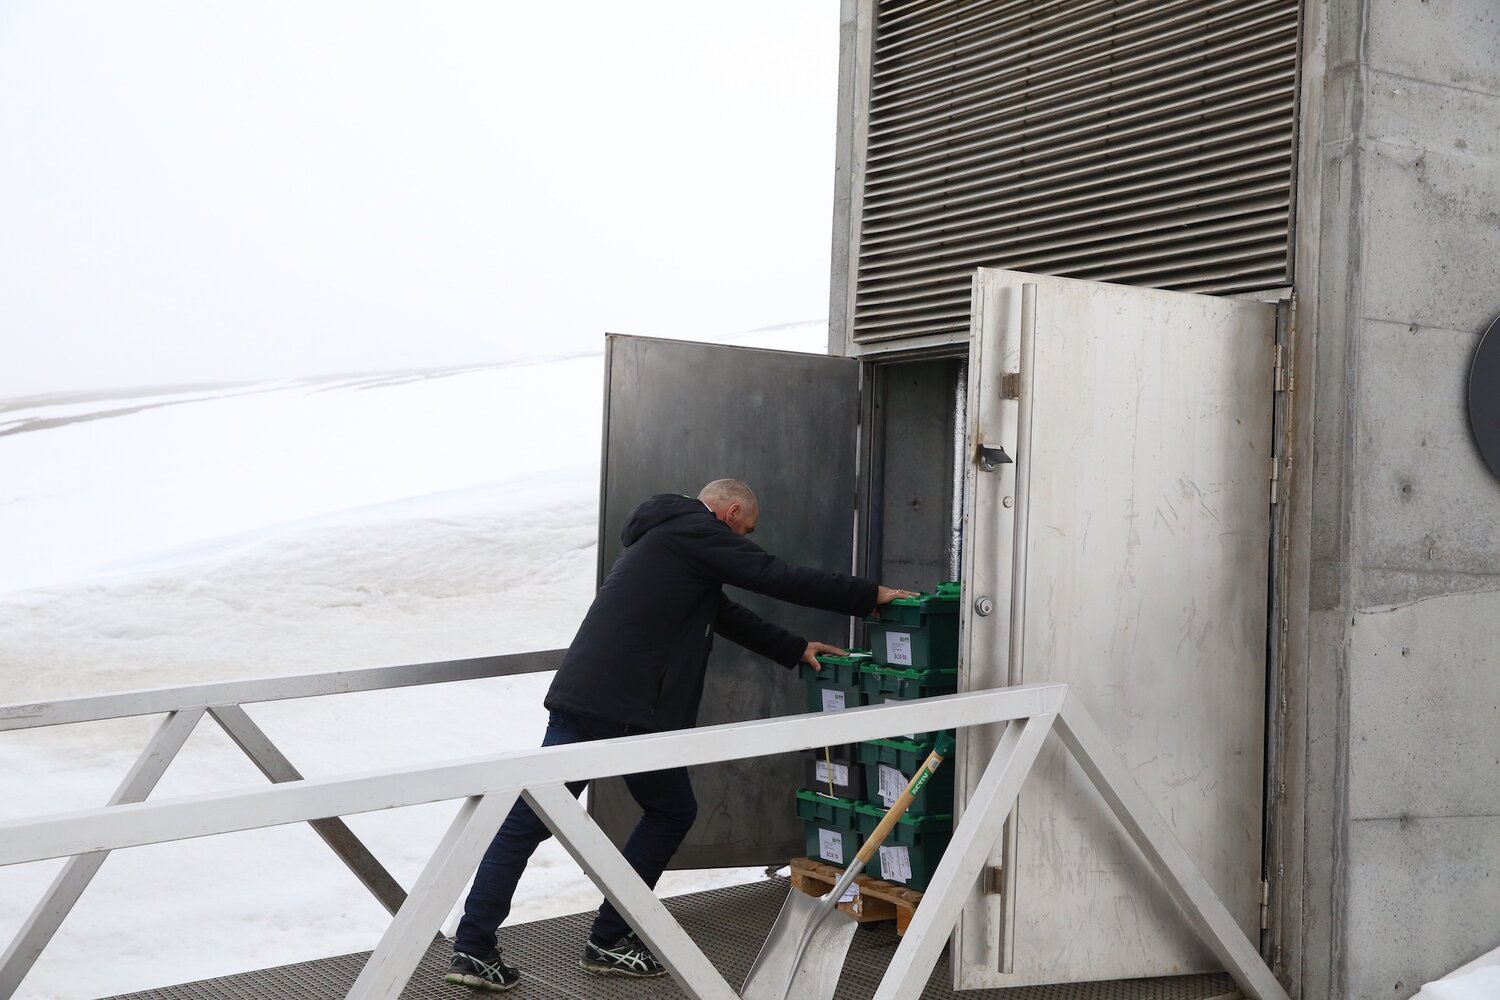 Åsmund Asdal, from the Nordic Genetic Resource Center (NordGen) brings seeds into the Svalbard Global Seed Vault